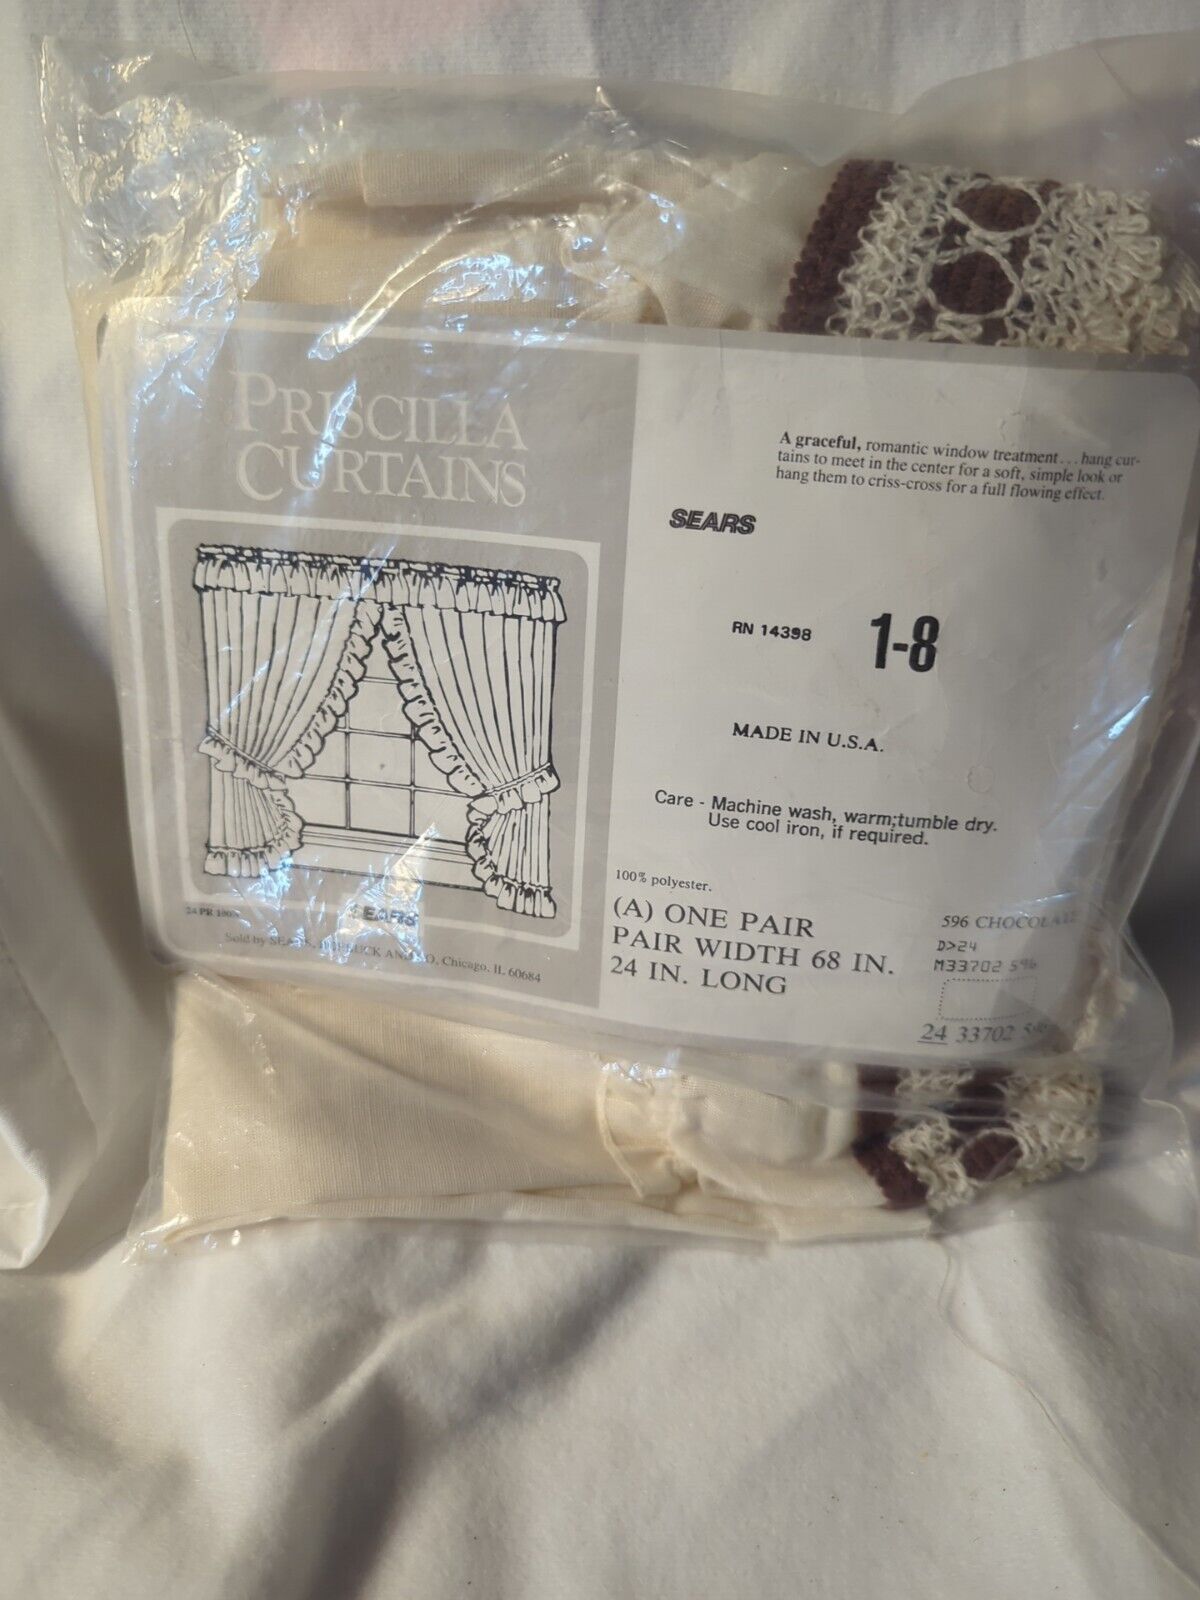 VTG Priscilla Ruffled Curtains Sears Ivory With Brown Embroidery 